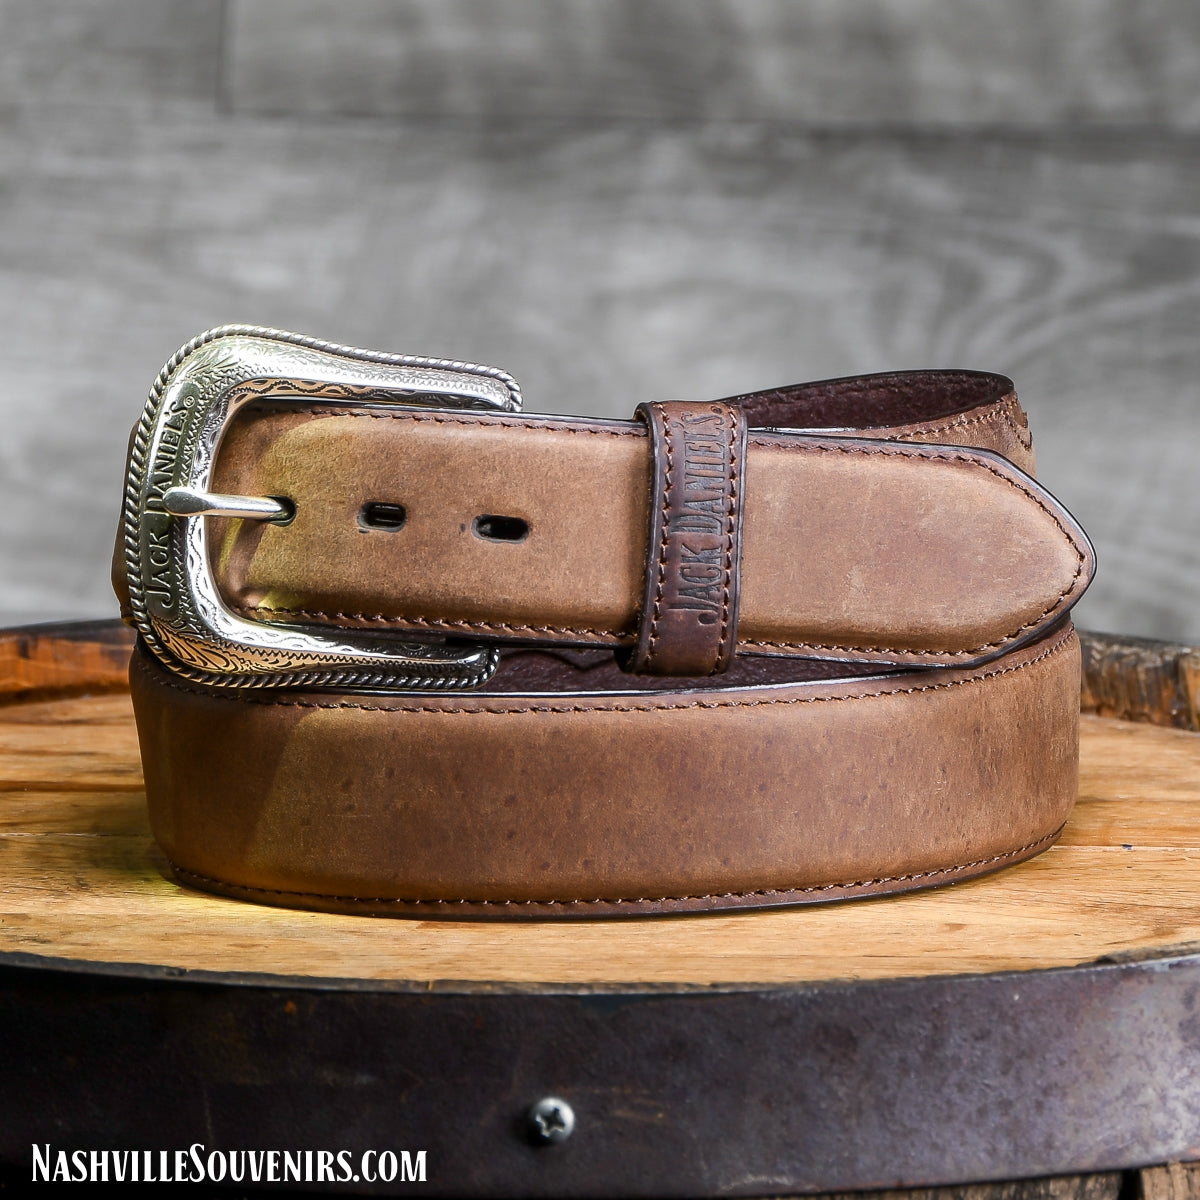 Officially licensed Jack Daniels Belt with Ornate Silver Buckle in Natural Brown Leather. Get yours today with FREE SHIPPING on all US orders over $75!